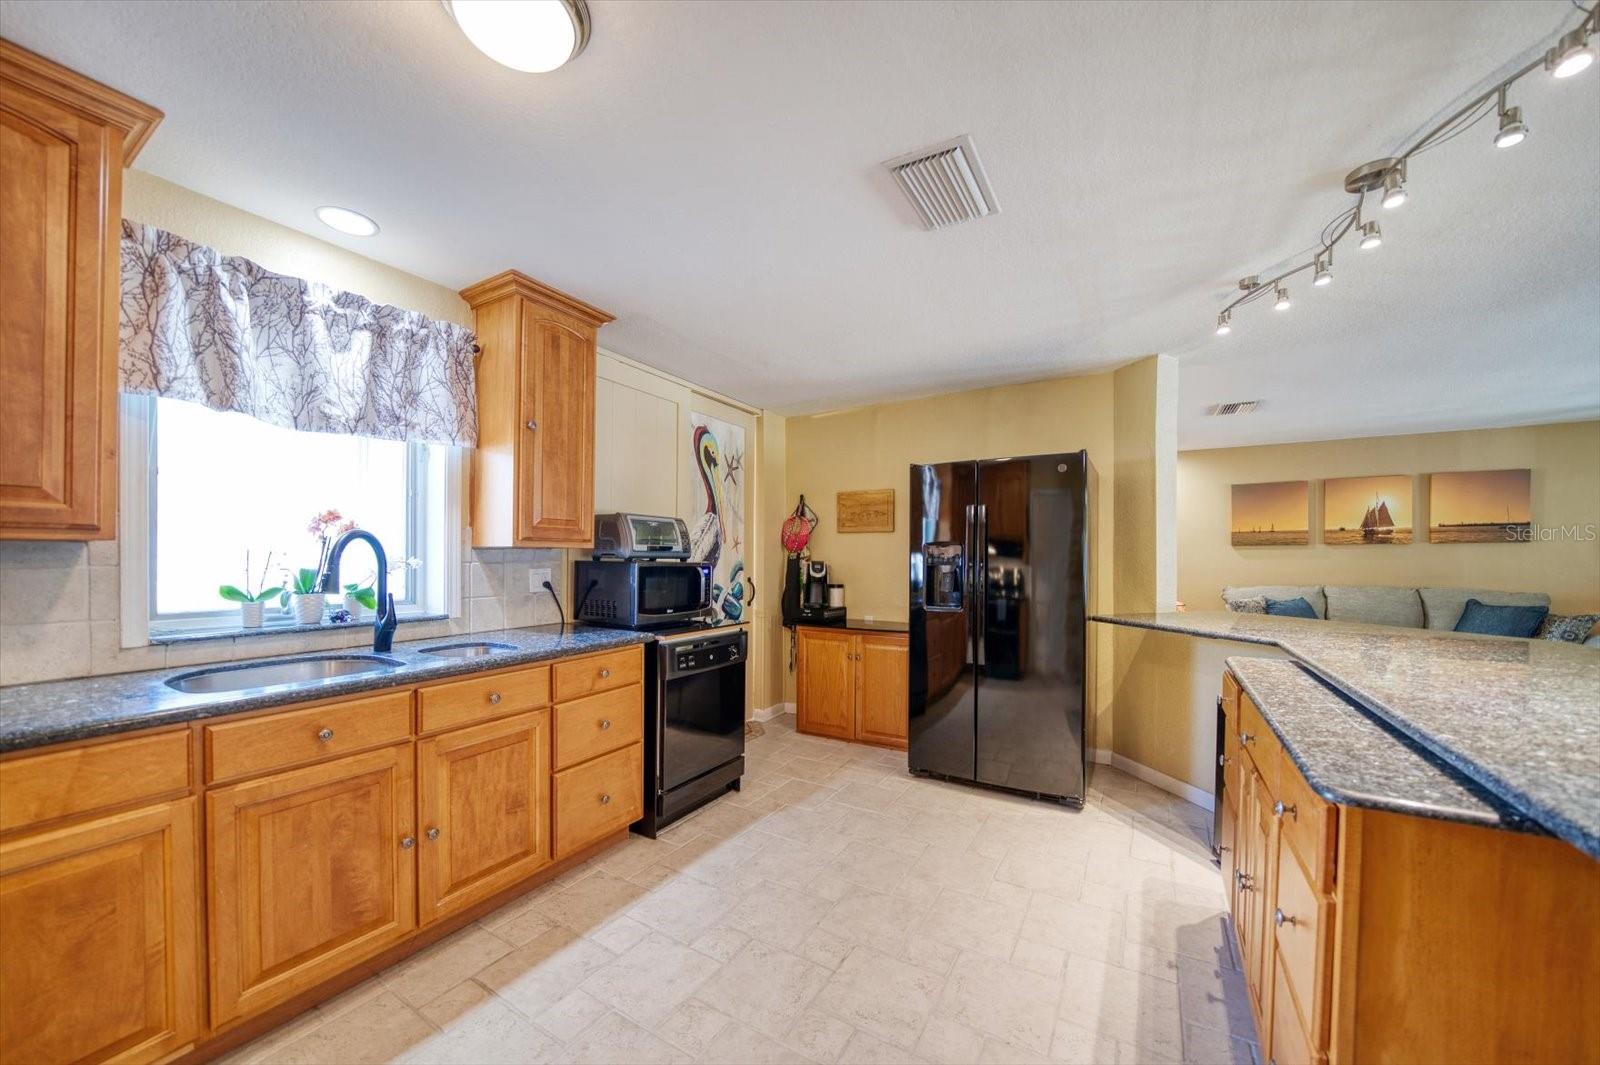 Fully equipped spacious kitchen-culinary experiences to enjoy!